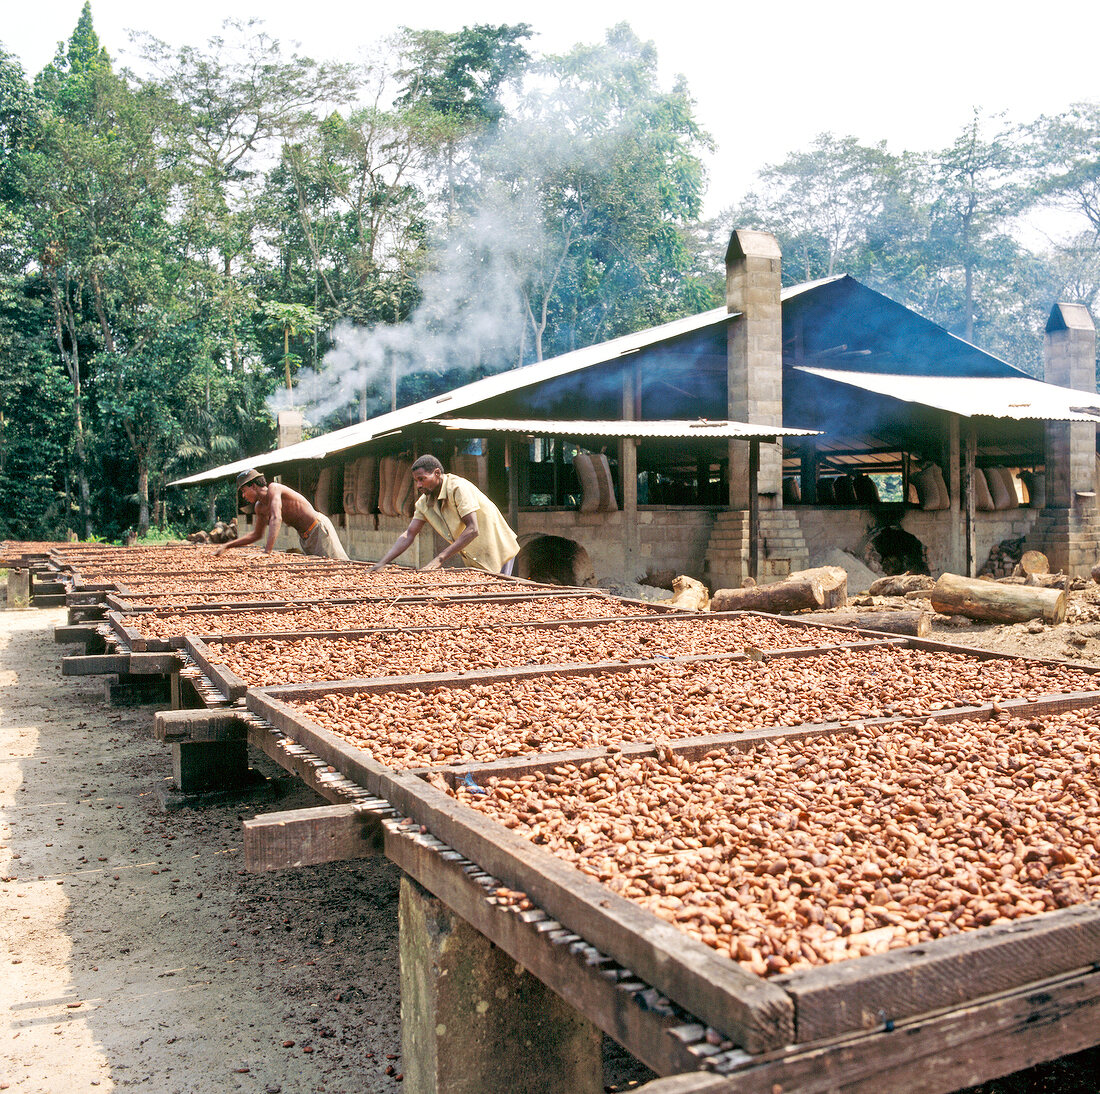 Cocoa beans being dried in wooden boxes